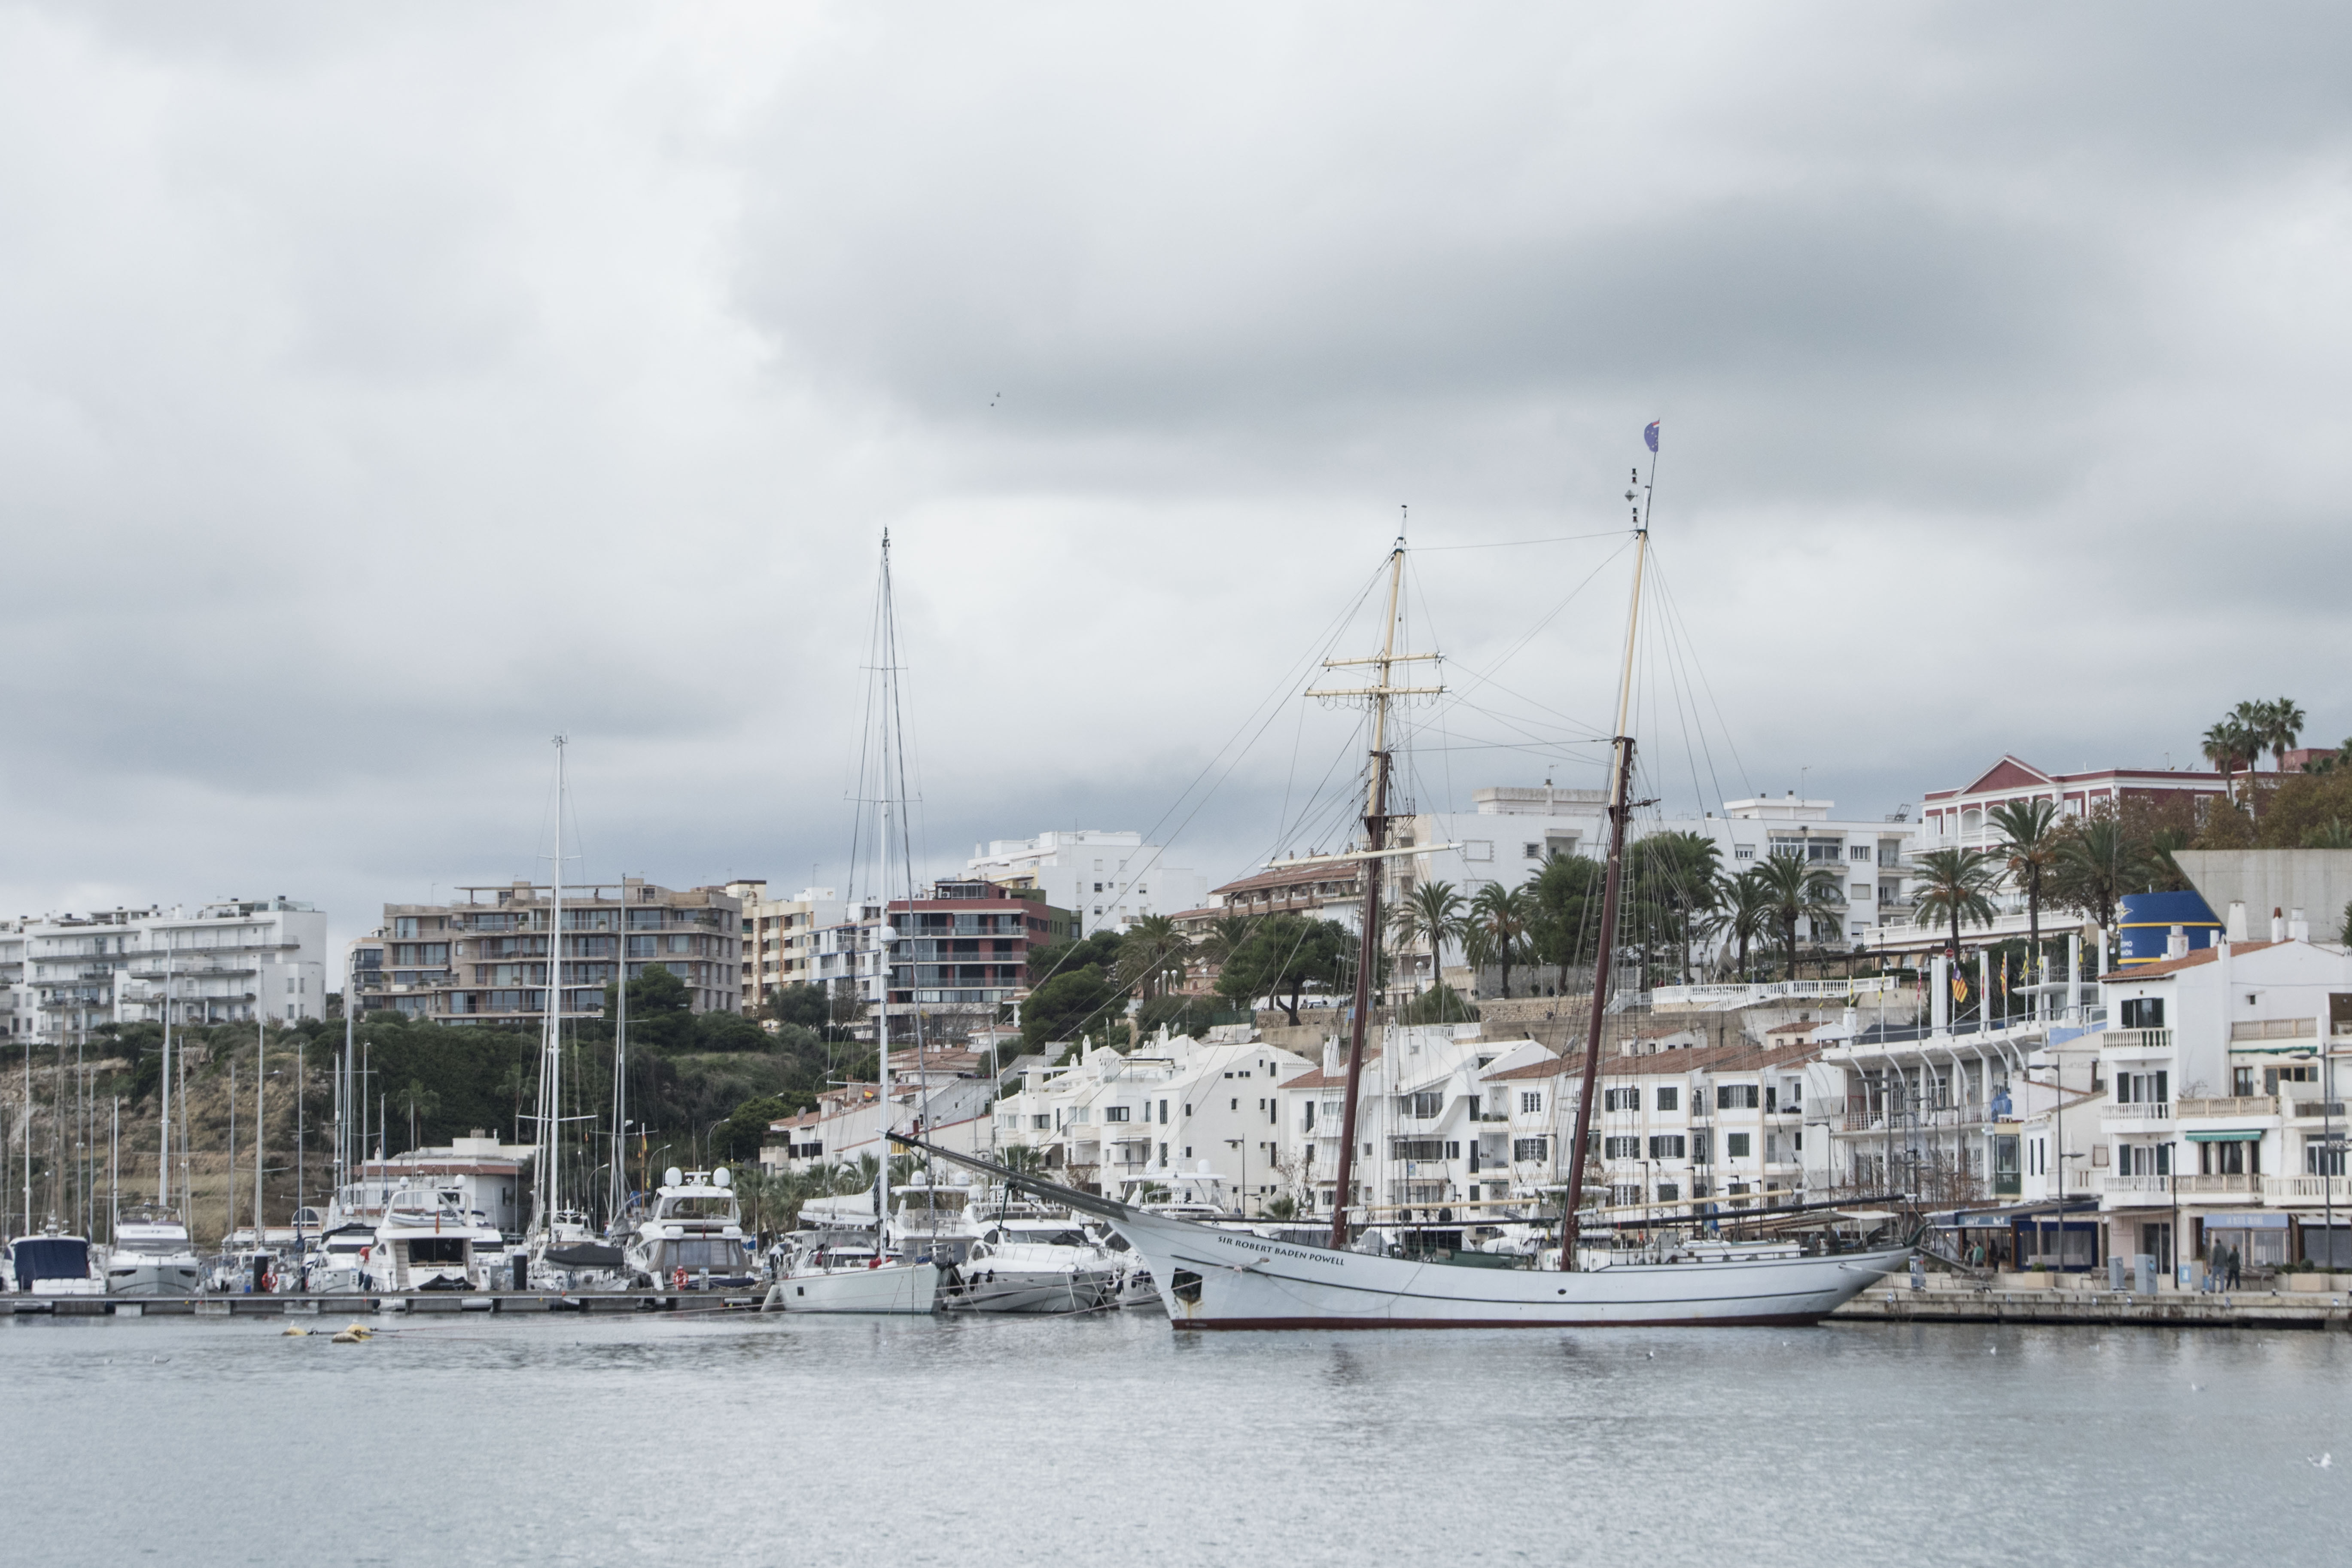 The APB puts out a tender for a nautical-sports marina and another for larger mooring spaces in the port of Maó